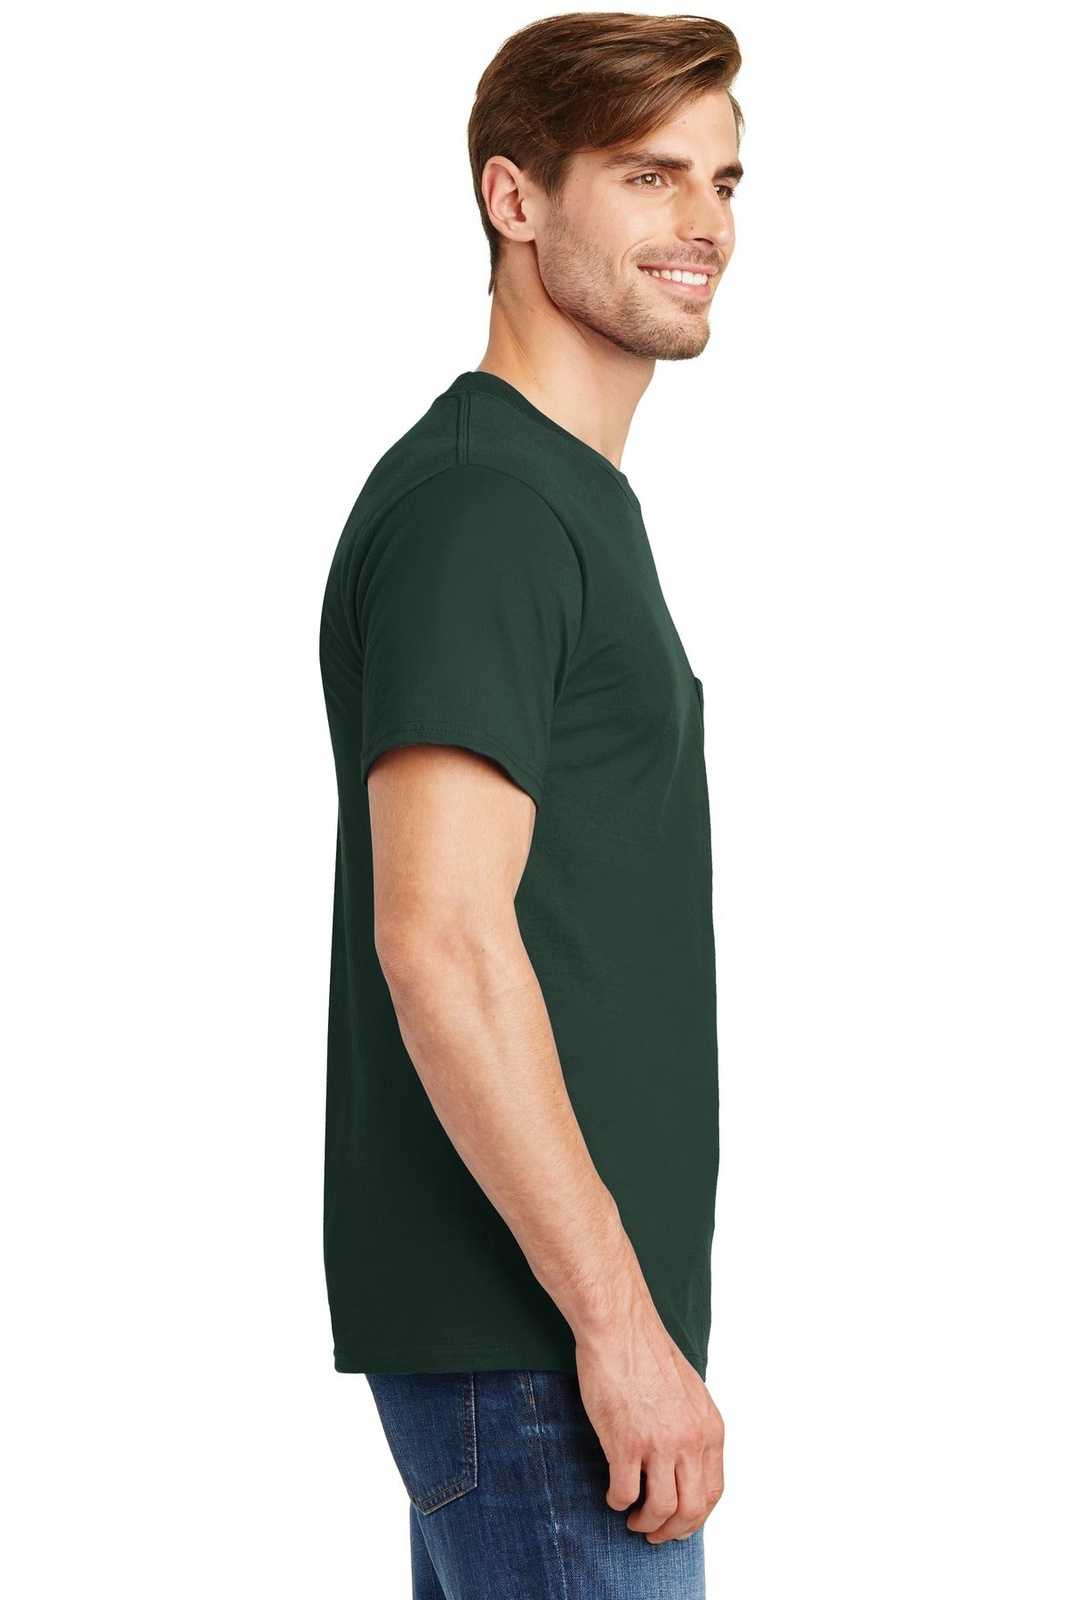 Hanes 5190 Beefy-T 100% Cotton T-Shirt with Pocket - Deep Forest - HIT a Double